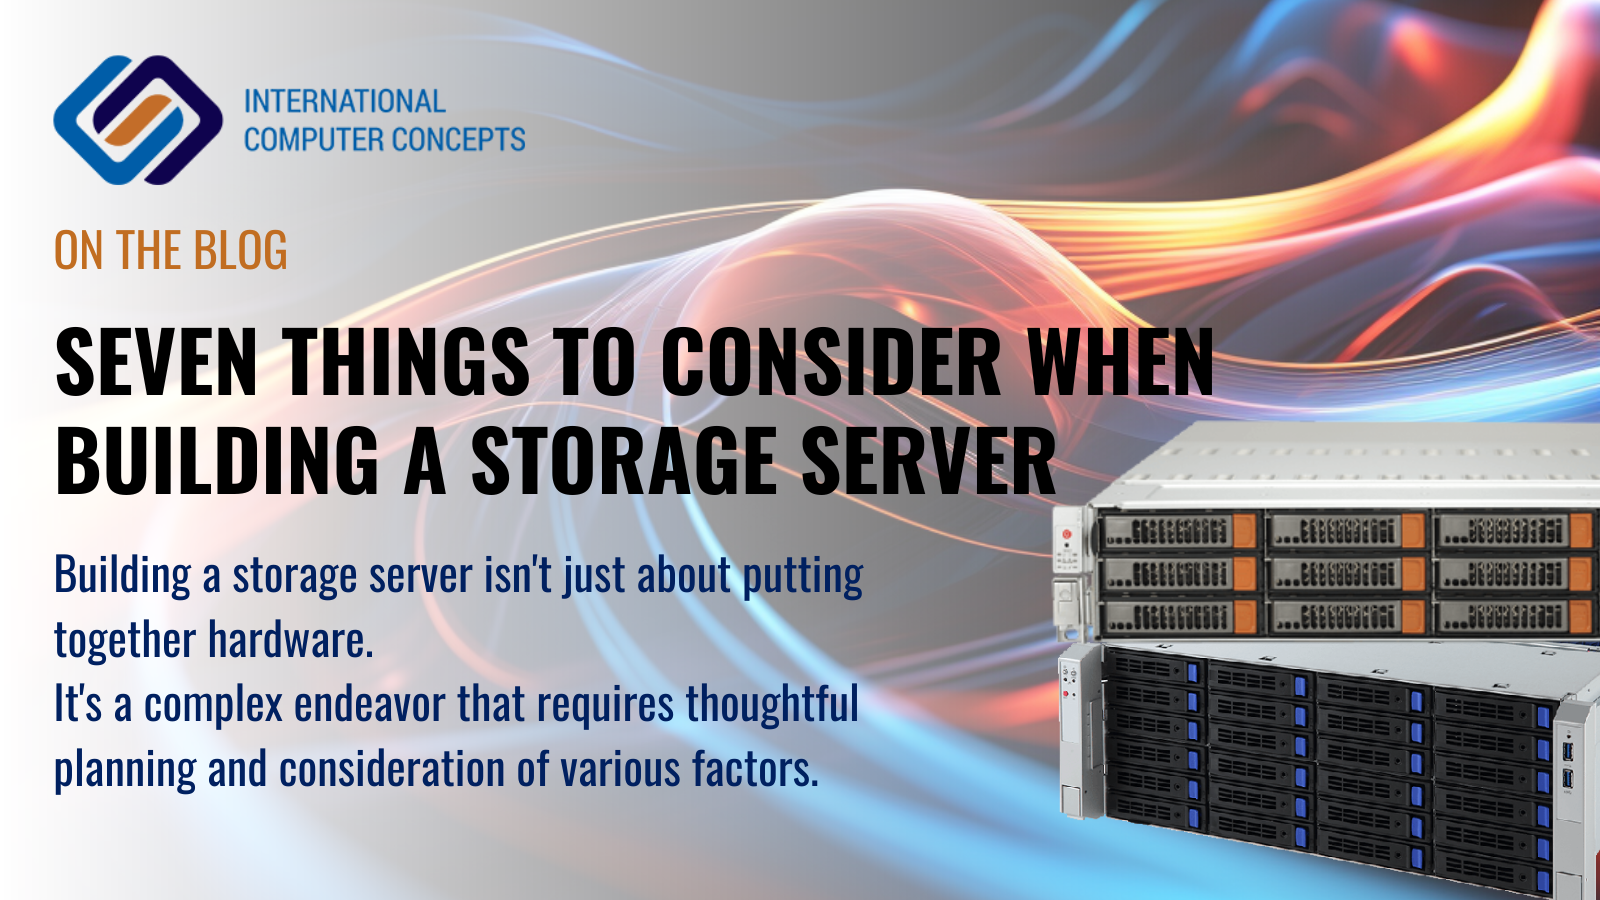 Seven things to consider when building a Storage Server